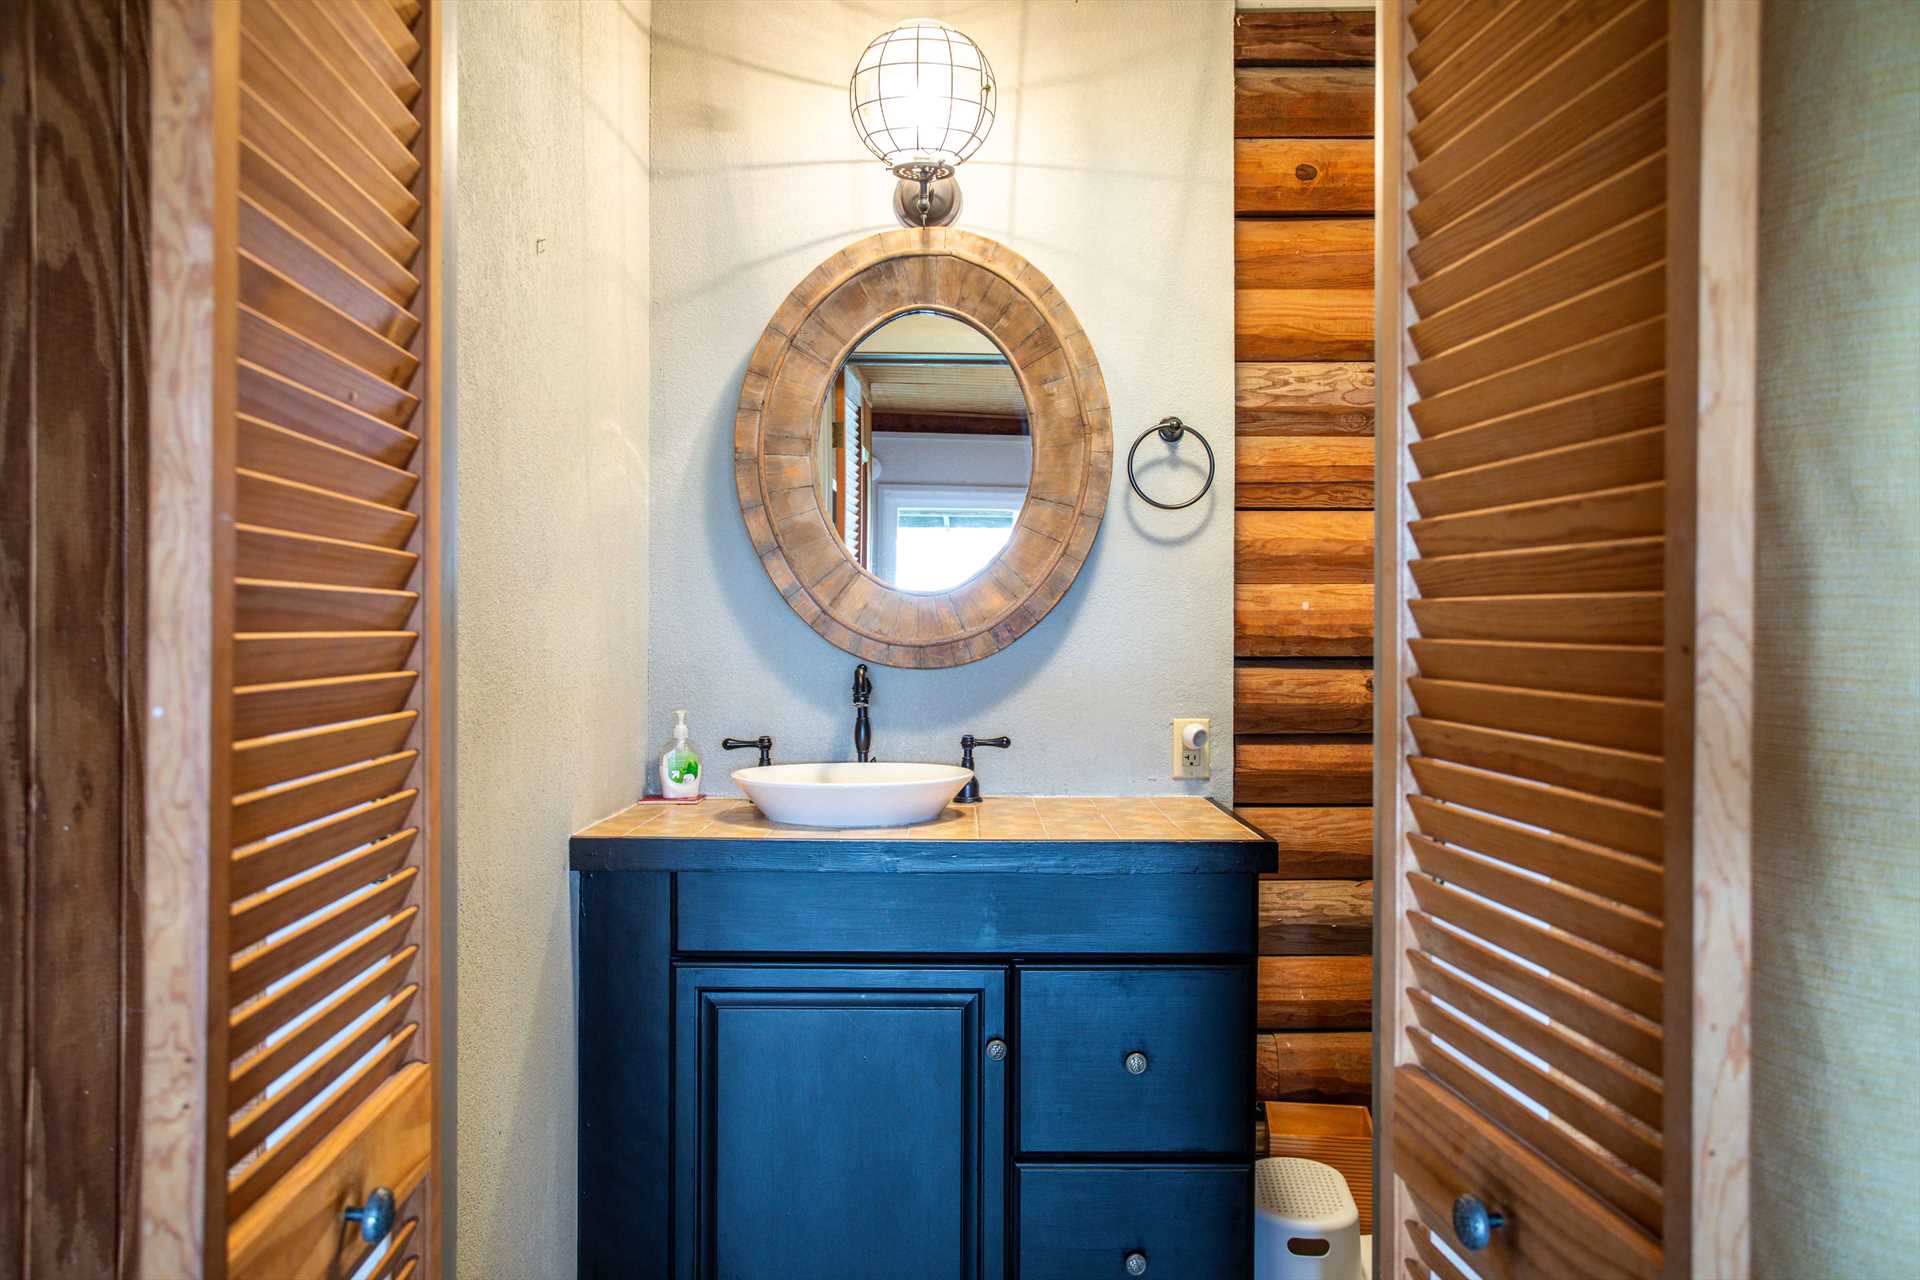                                                 Fun and functional decor can be found throughout the Escape-even in the bathrooms!